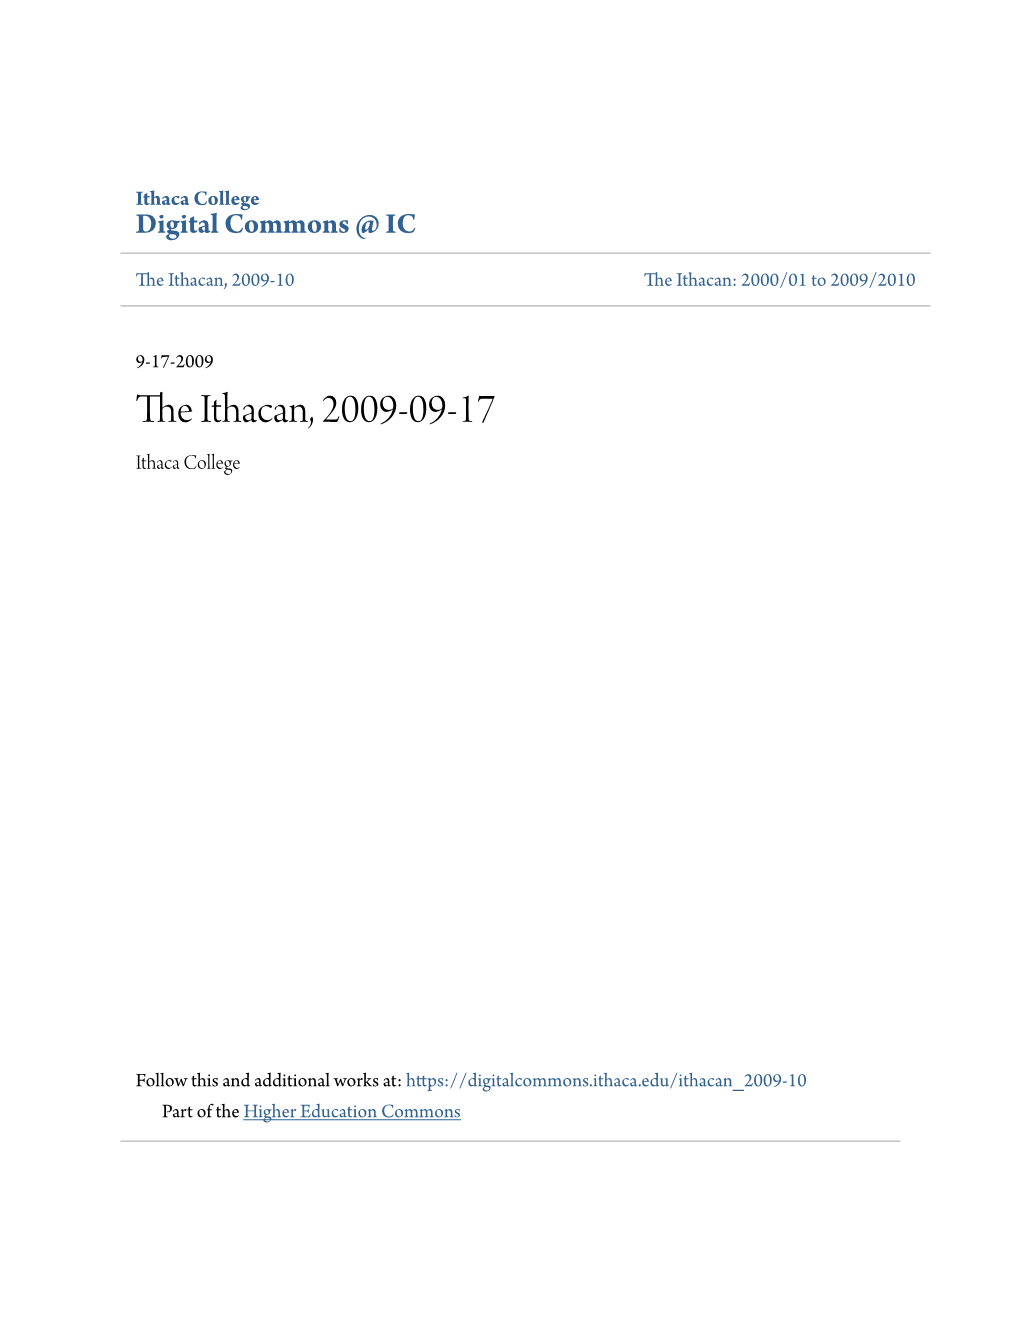 The Ithacan, 2009-09-17